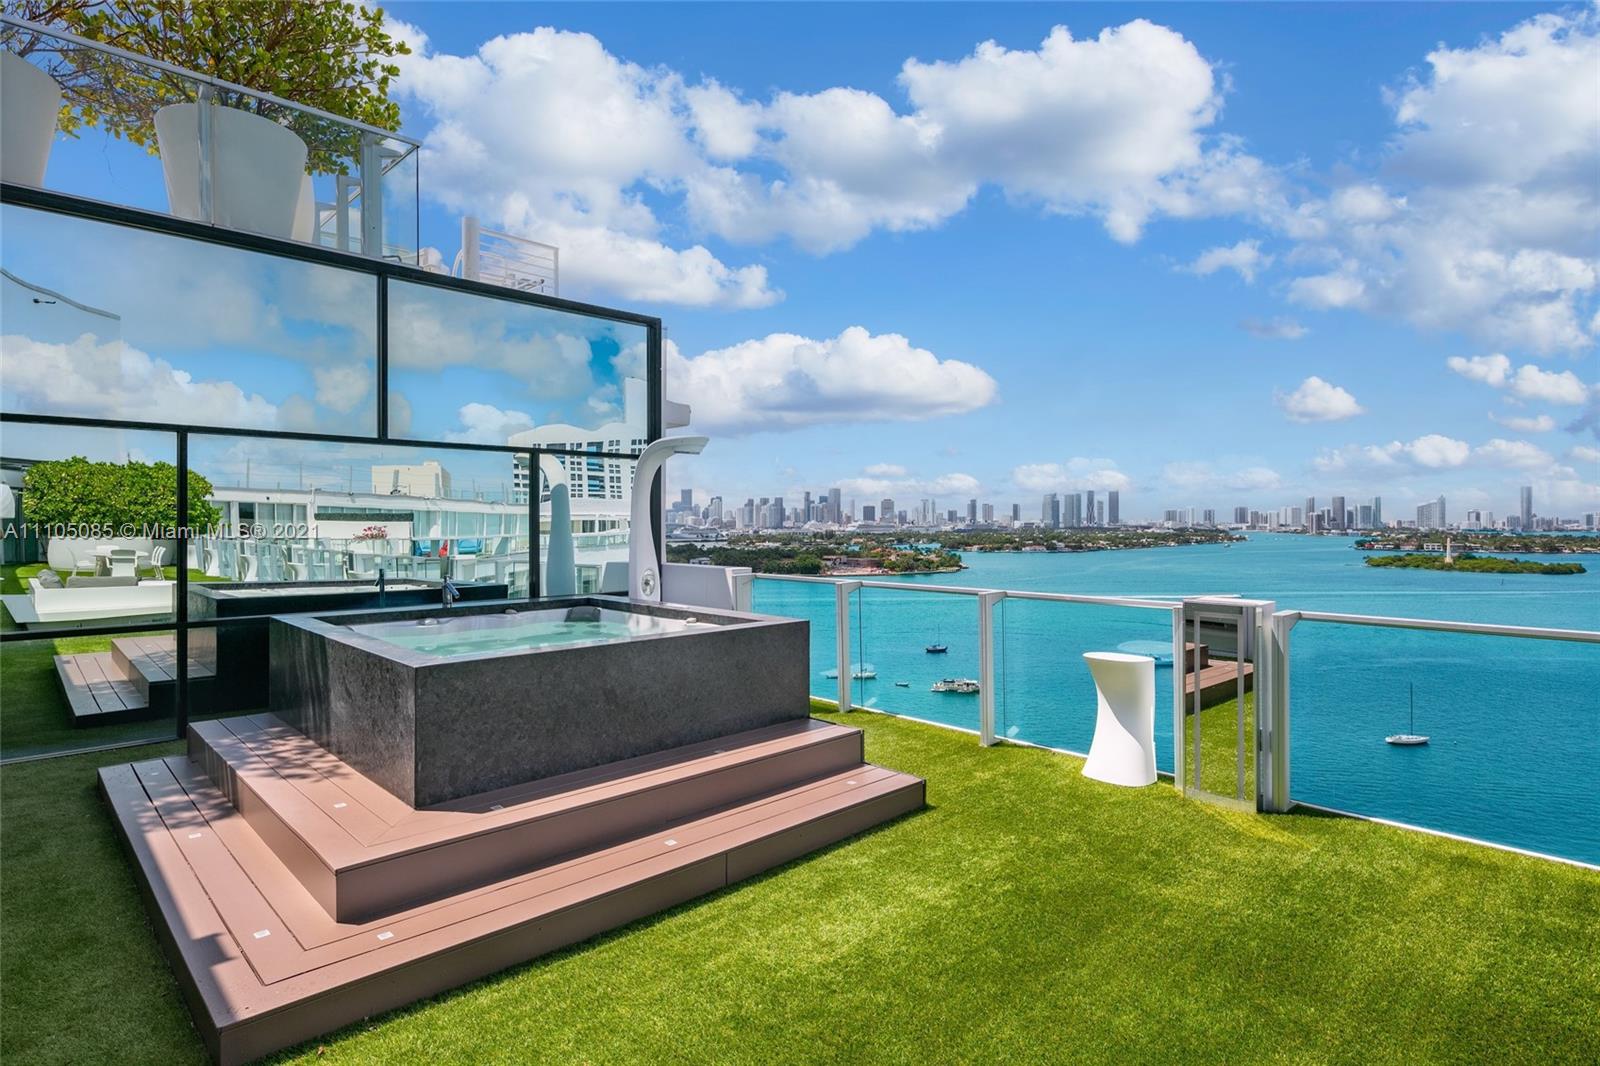 Welcome to the Ultimate South Beach Penthouse! This Designer Curated Residence is the ONLY combined Tower Suite at the Mondrian Hotel & is the LARGEST In the building at over 4,120SF. Enjoy 3 Bedrooms , which includes 2 oversized primary suites , an office, chefs kitchen w/ top of the line appliances, smart home system, a 1,400 SF Terrace w/ private jacuzzi & completely unobstructed Bay & Downtown Skyline views from every room. You will be hard pressed to find a better postcard view of the Downtown Skyline Sunsets .TS2/3 offers a sprawling open layout with tons of entertainment space for those who want to host & entertain. Additionally, the newly renovated Mondrian Hotel offers a world class spa, bay front fitness center center & Baia Beach Club which has a fun, sexy vibe & 5 star dining.